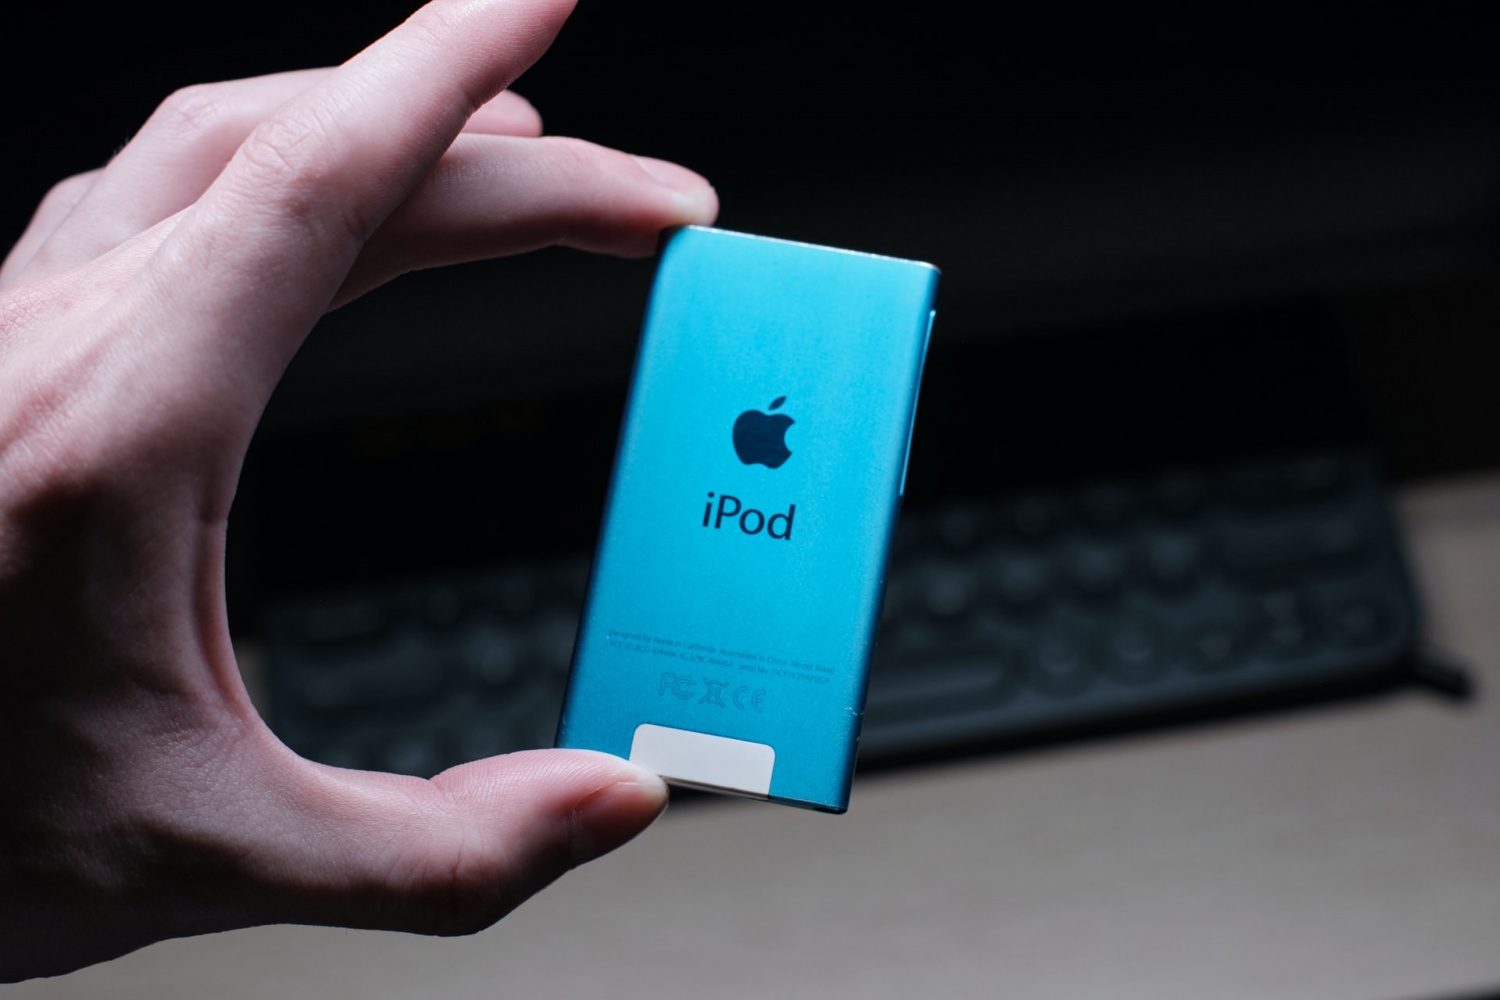 iPod Value Reportedly Drops to 89% on Average Following its Discontinued Production